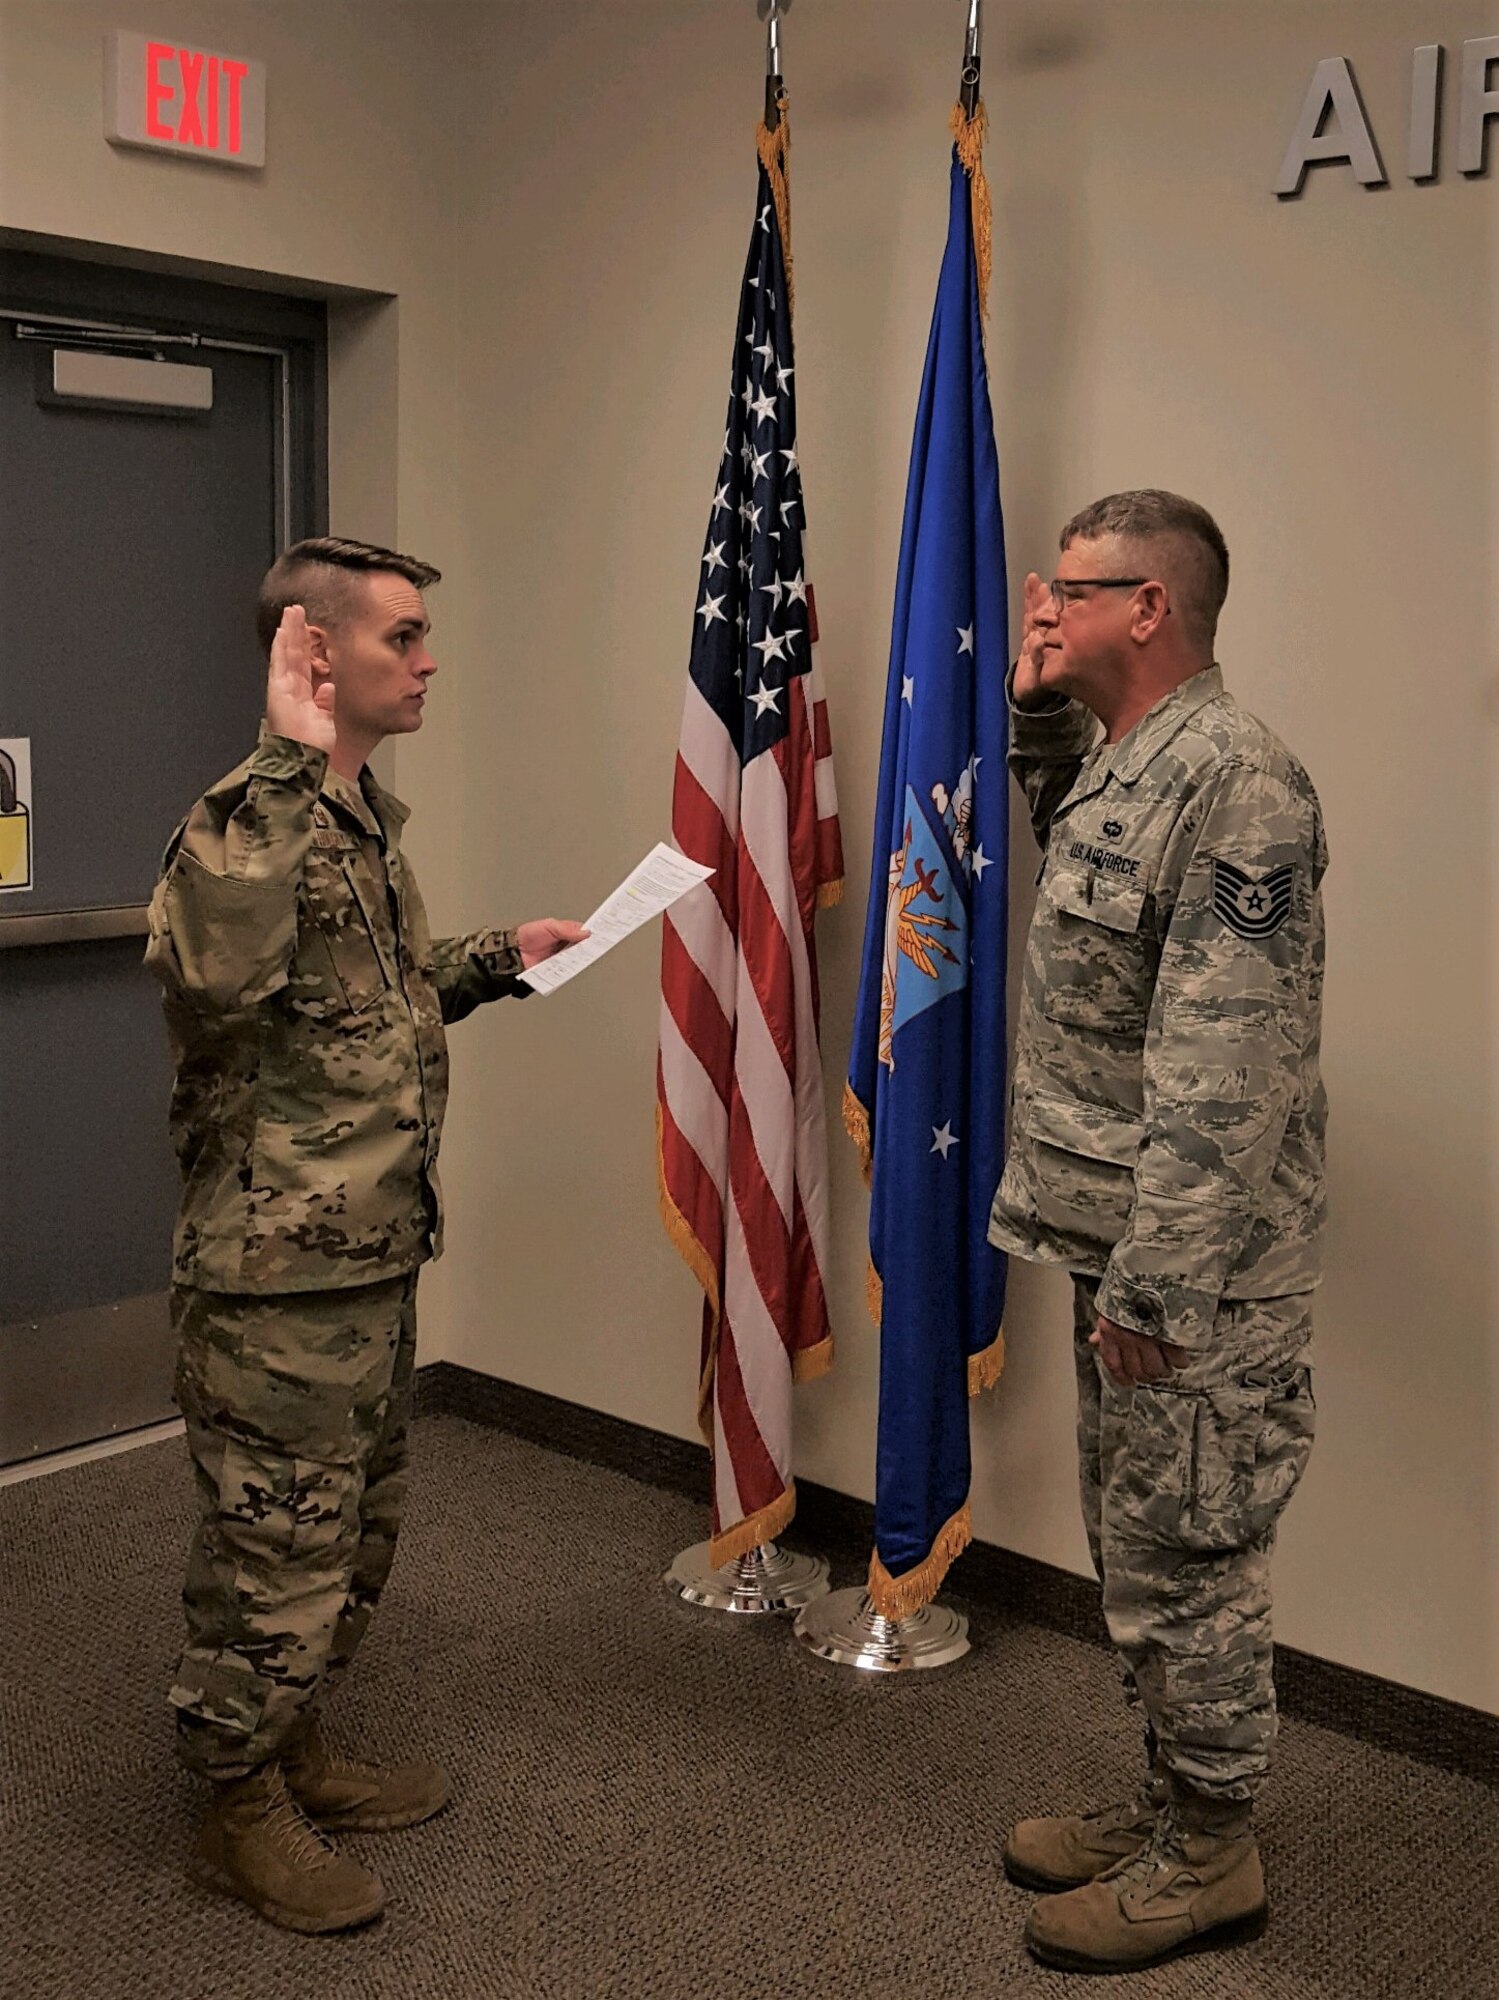 Maj. Ben Hulsey, 913th Force Support Squadron commander, facilitates the oath of enlistment to Tech. Sgt. Raymond Jauch, 96th Aerial Port Squadron air transportation specialist, on March 11, 2019 at Little Rock Air Force Base, Ark.  Jauch will retire this year with more that 28 years of active and reserve military service. (Courtesy photo)